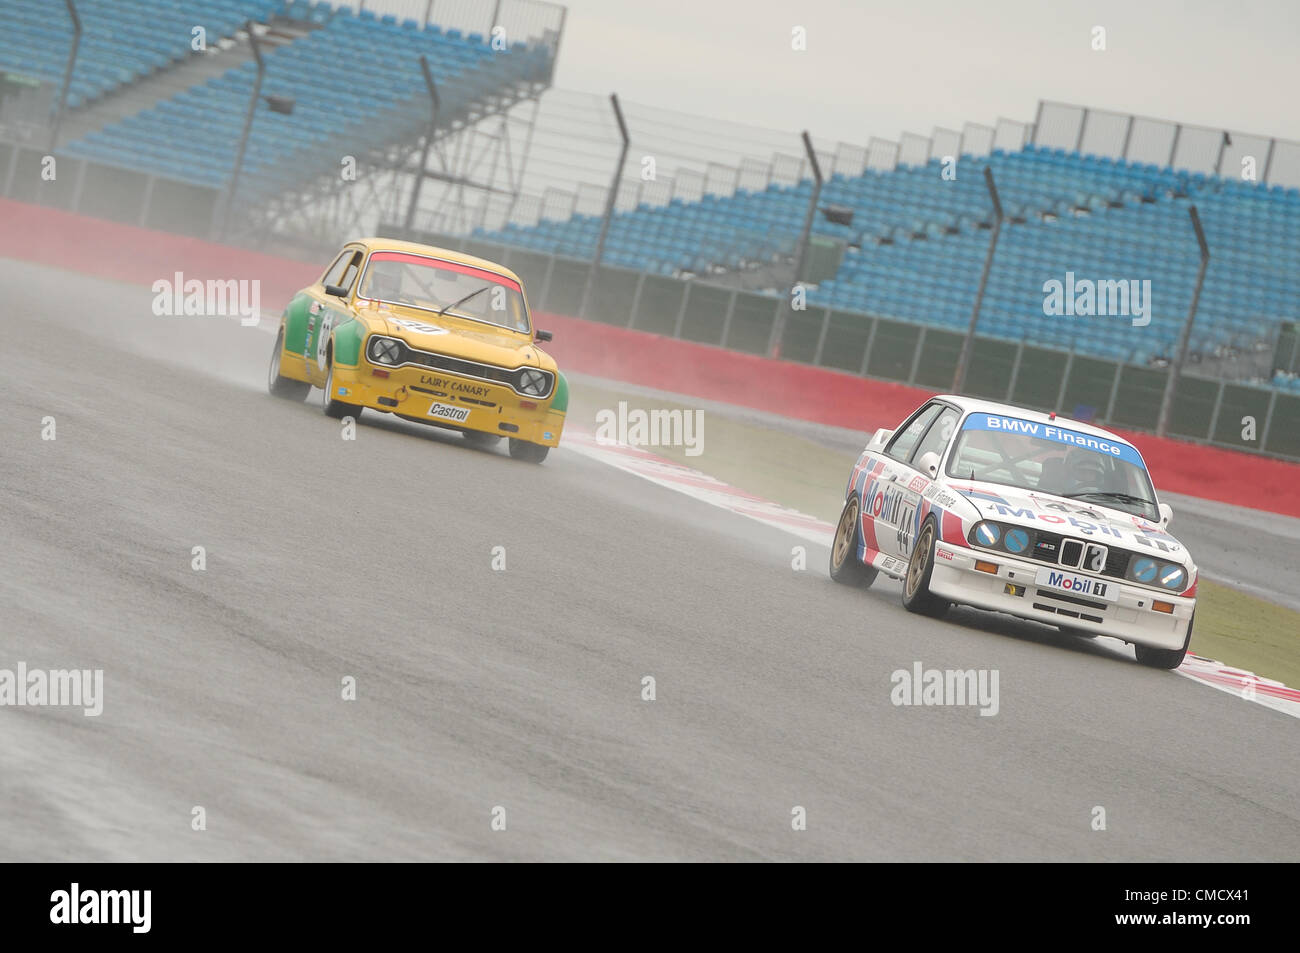 20th July 2012, Silverstone, UK  David Cuff and Mark Smith's BMW E30 M3, and Michael Bell's Ford Escort in the rain during qualifying for the Fujifilm Touring Car Trophy 1970-2000 race at Silverstone Classic 2012 Stock Photo